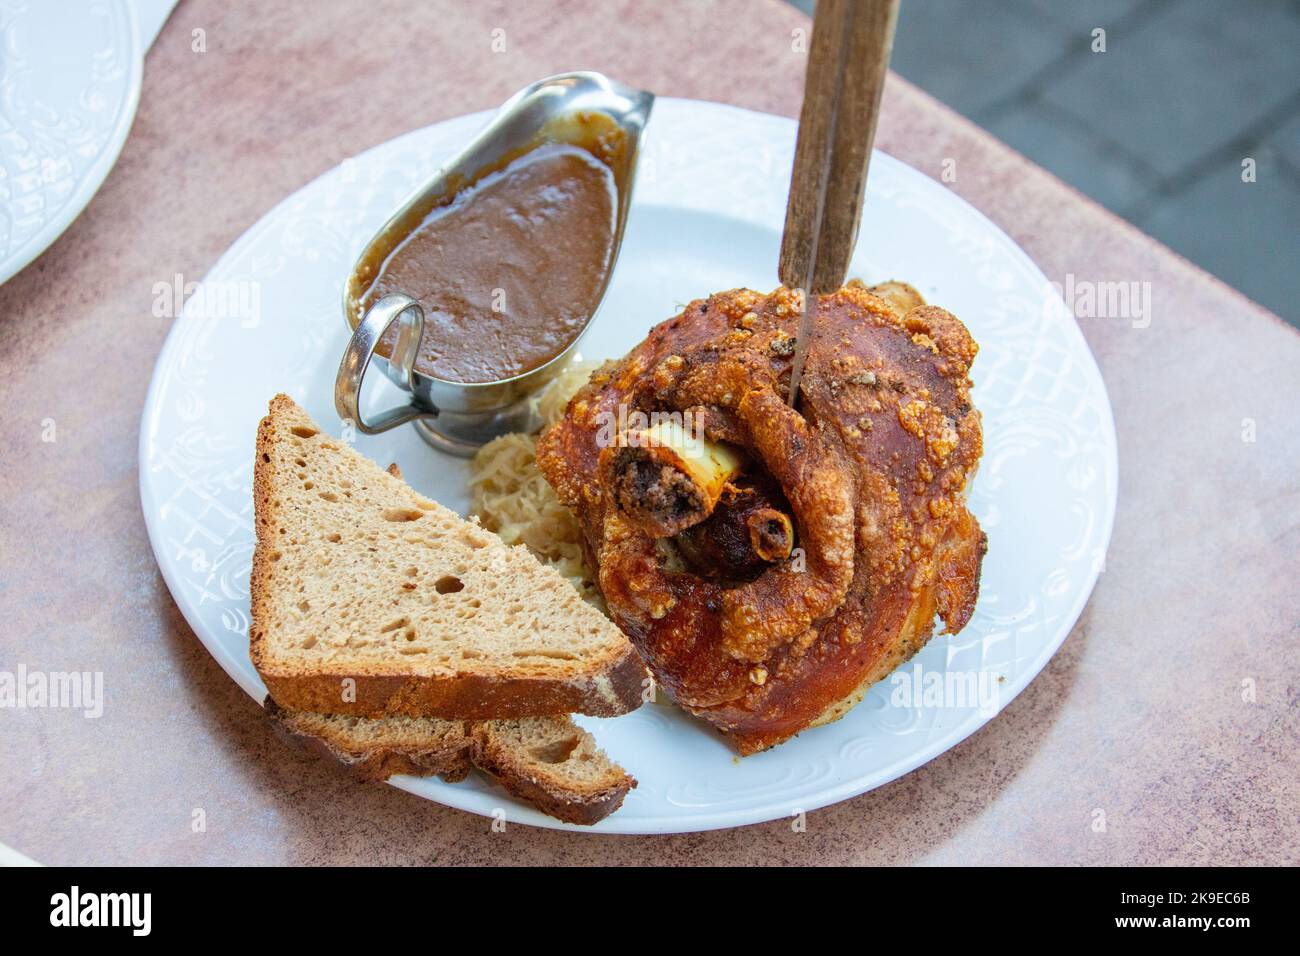 Roasted pork hock with bread and sourkraut at Brauhaus Kloster Machern, Bernkastel-Kues, Germany Stock Photo